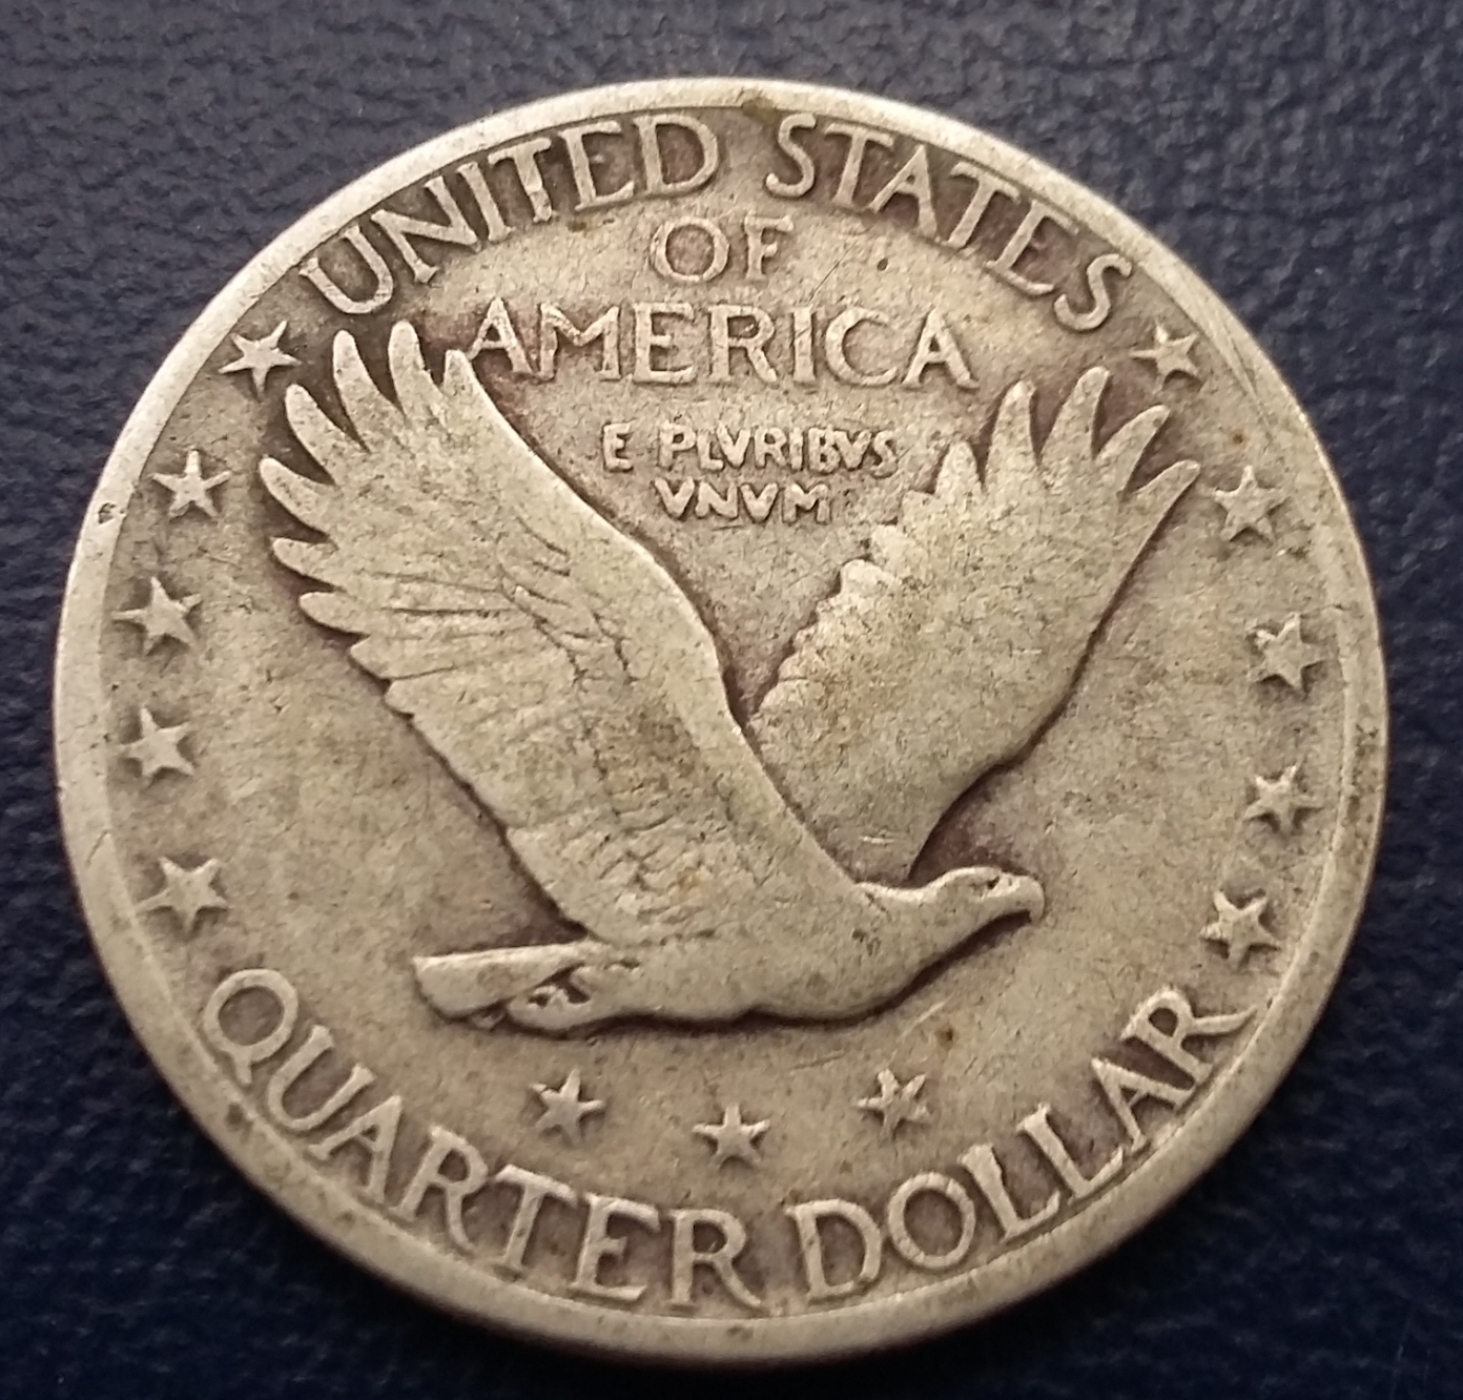 photos of all us liberty coins